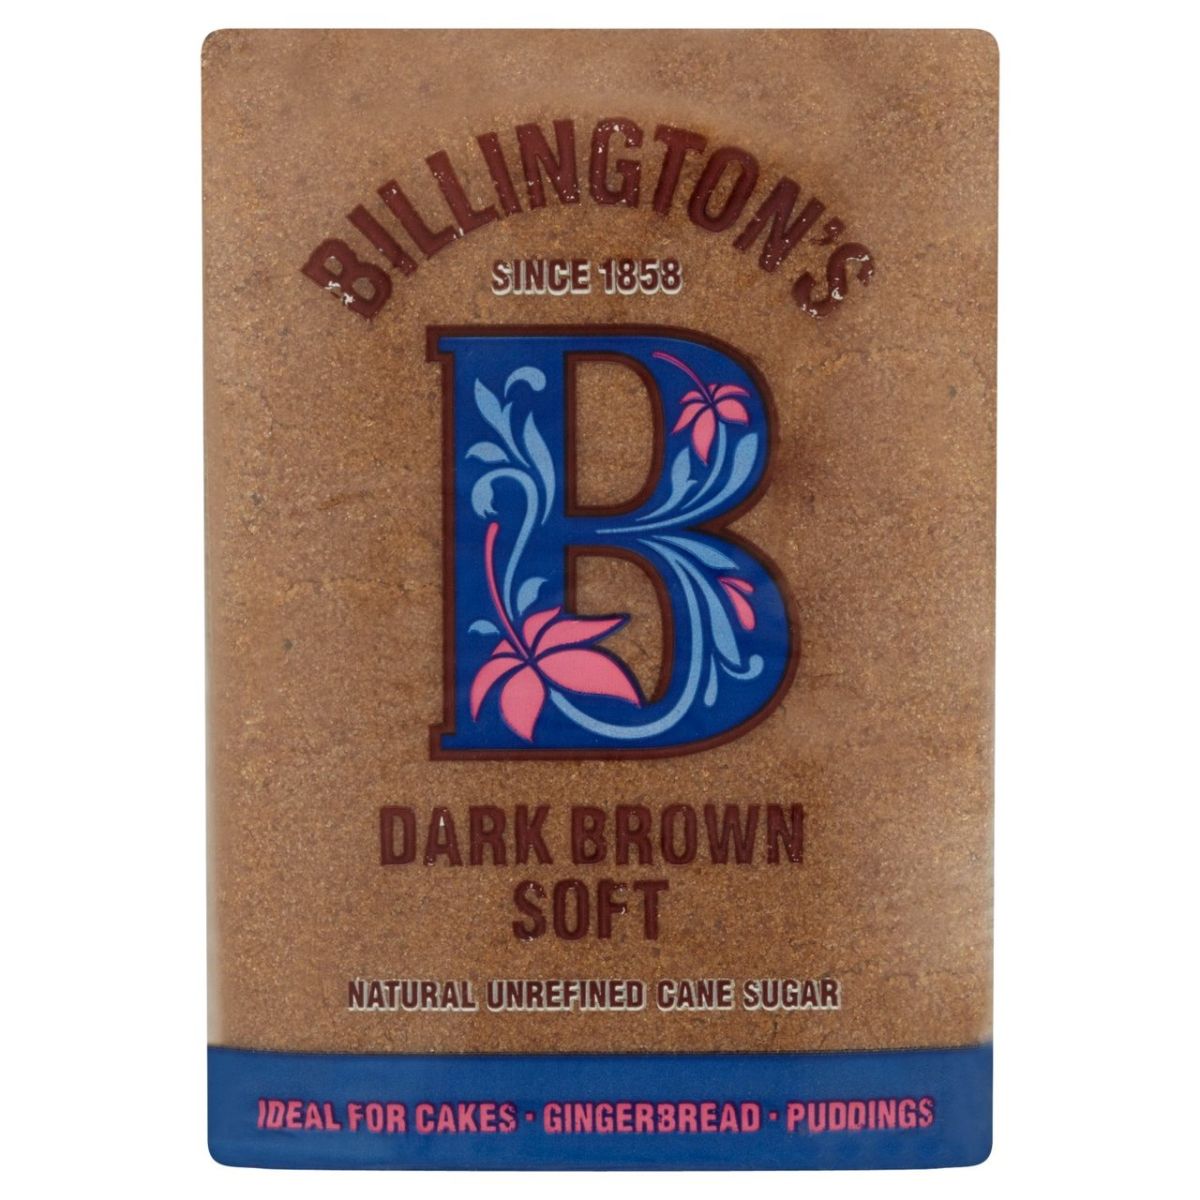 A package of Billington's Dark Brown Soft Sugar - 500g, ideal for cakes, gingerbread, and puddings.